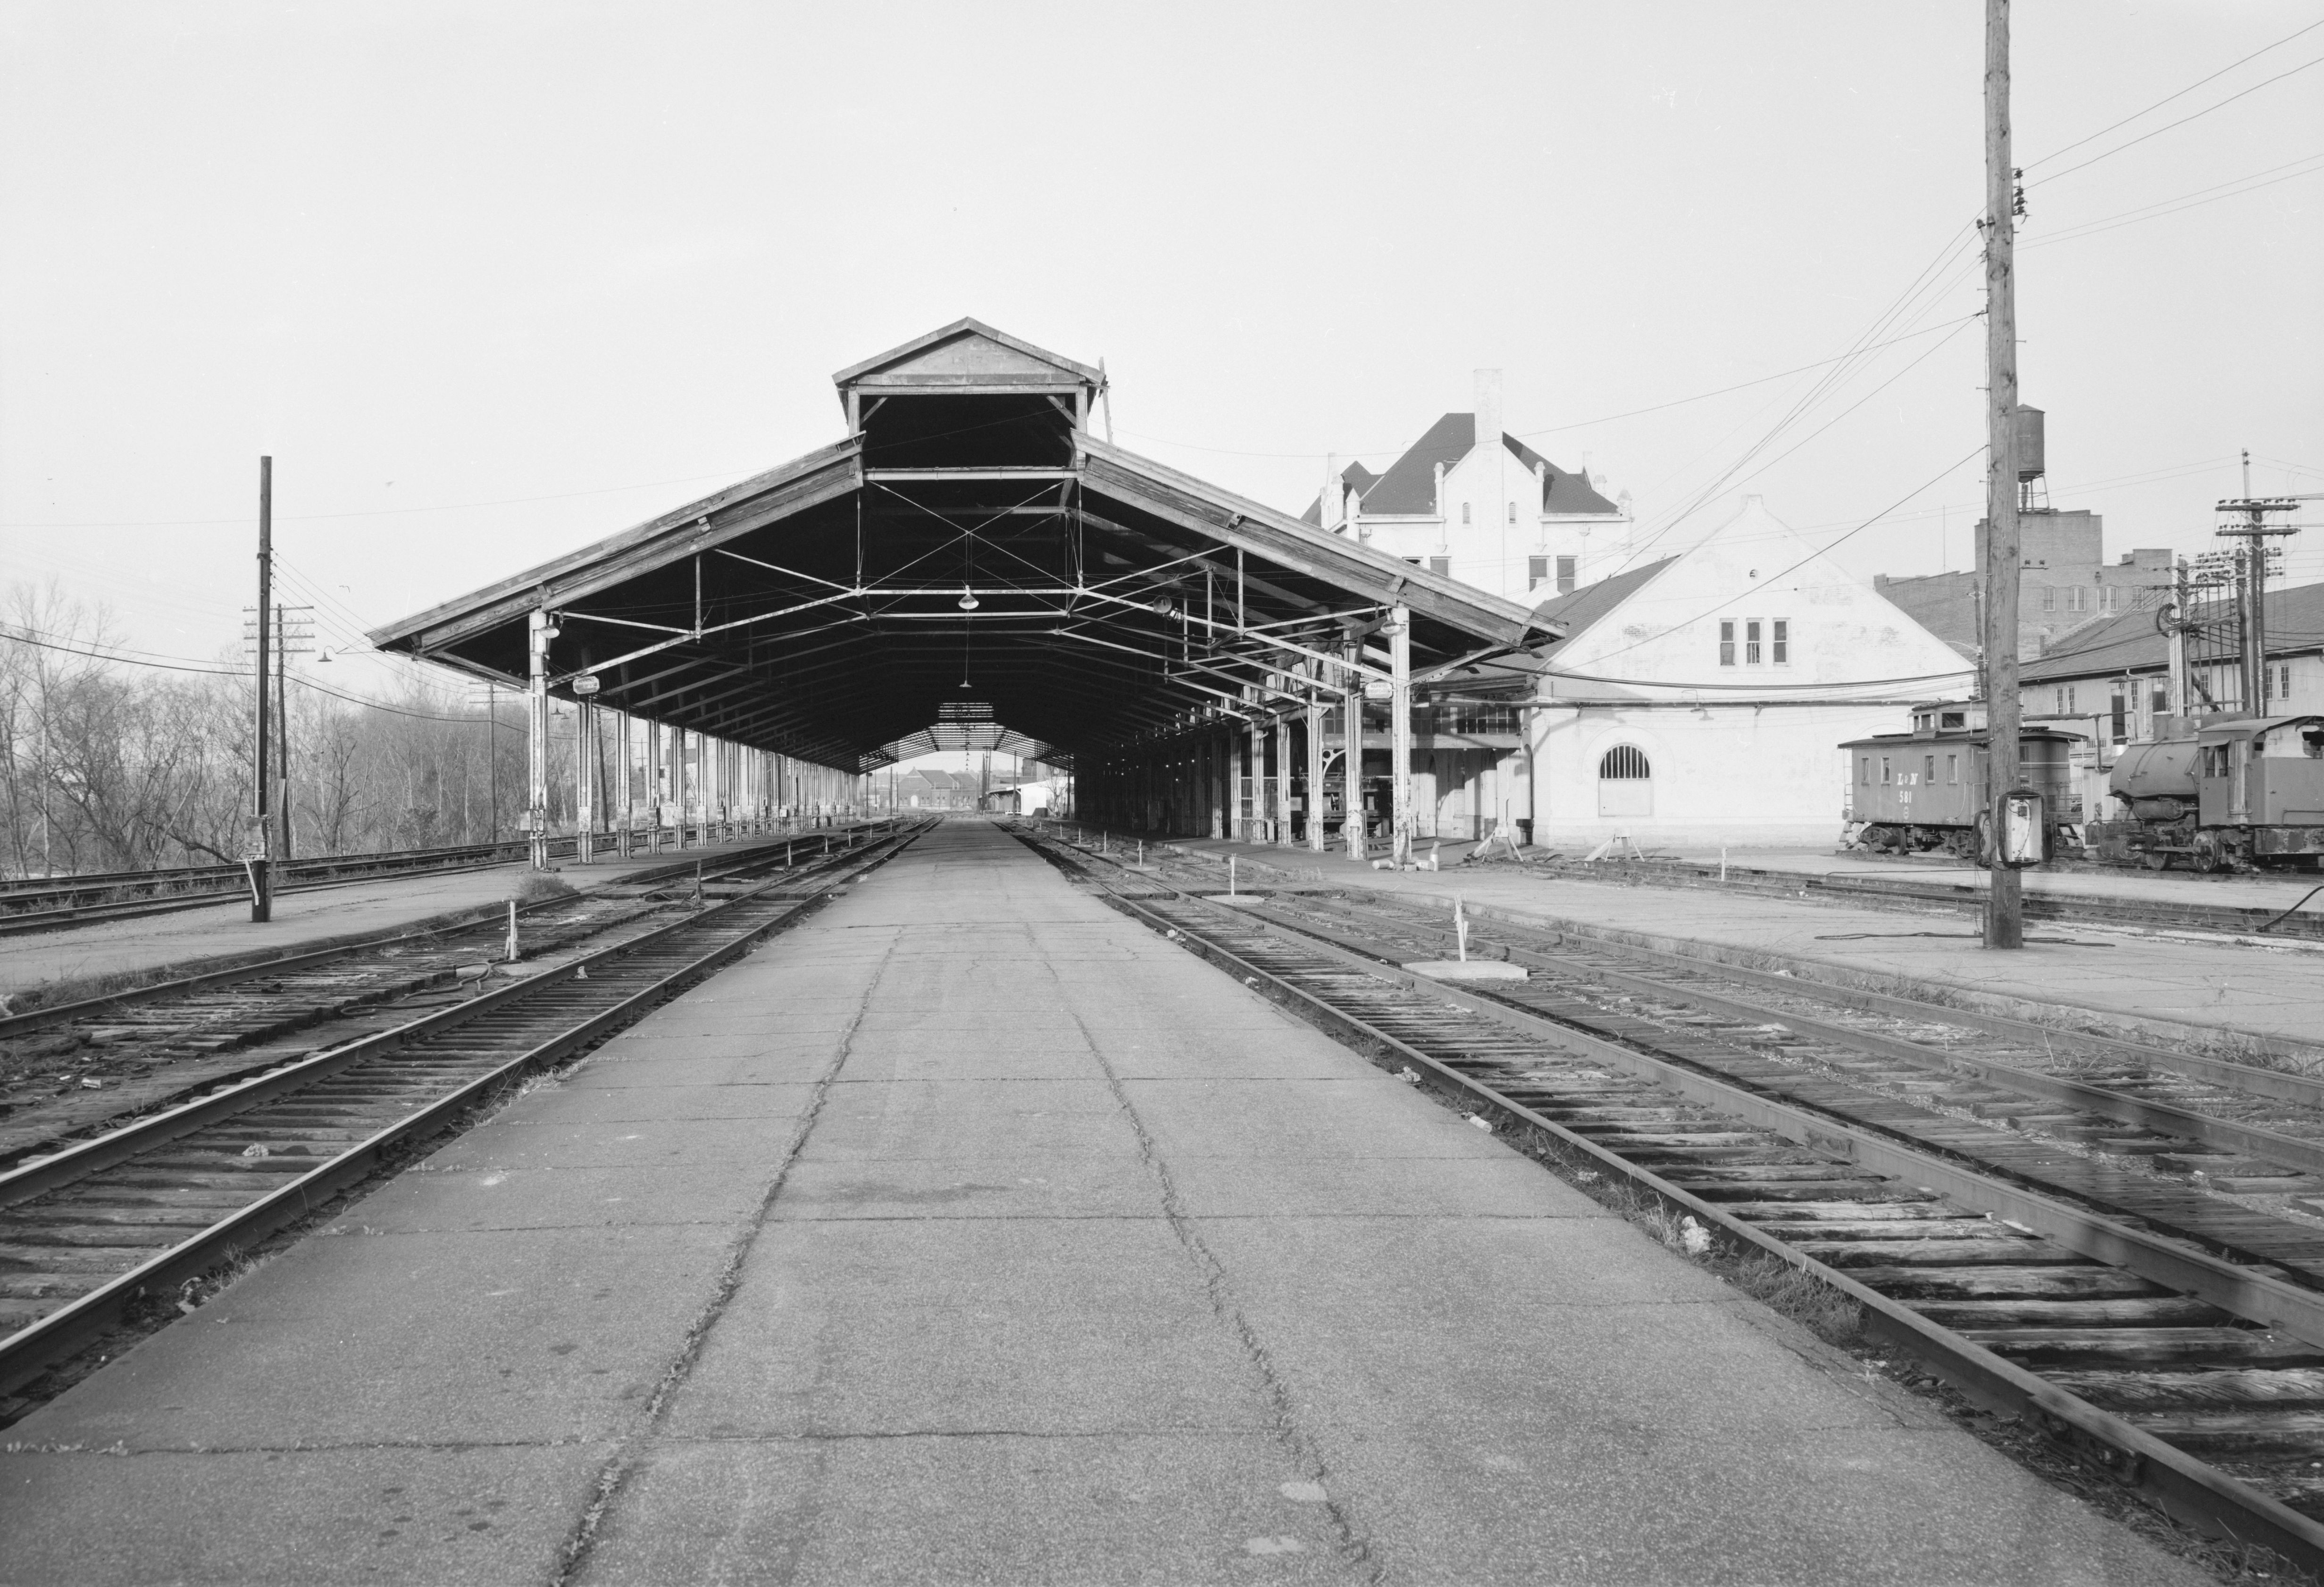 Montgomery Union Station trainshed